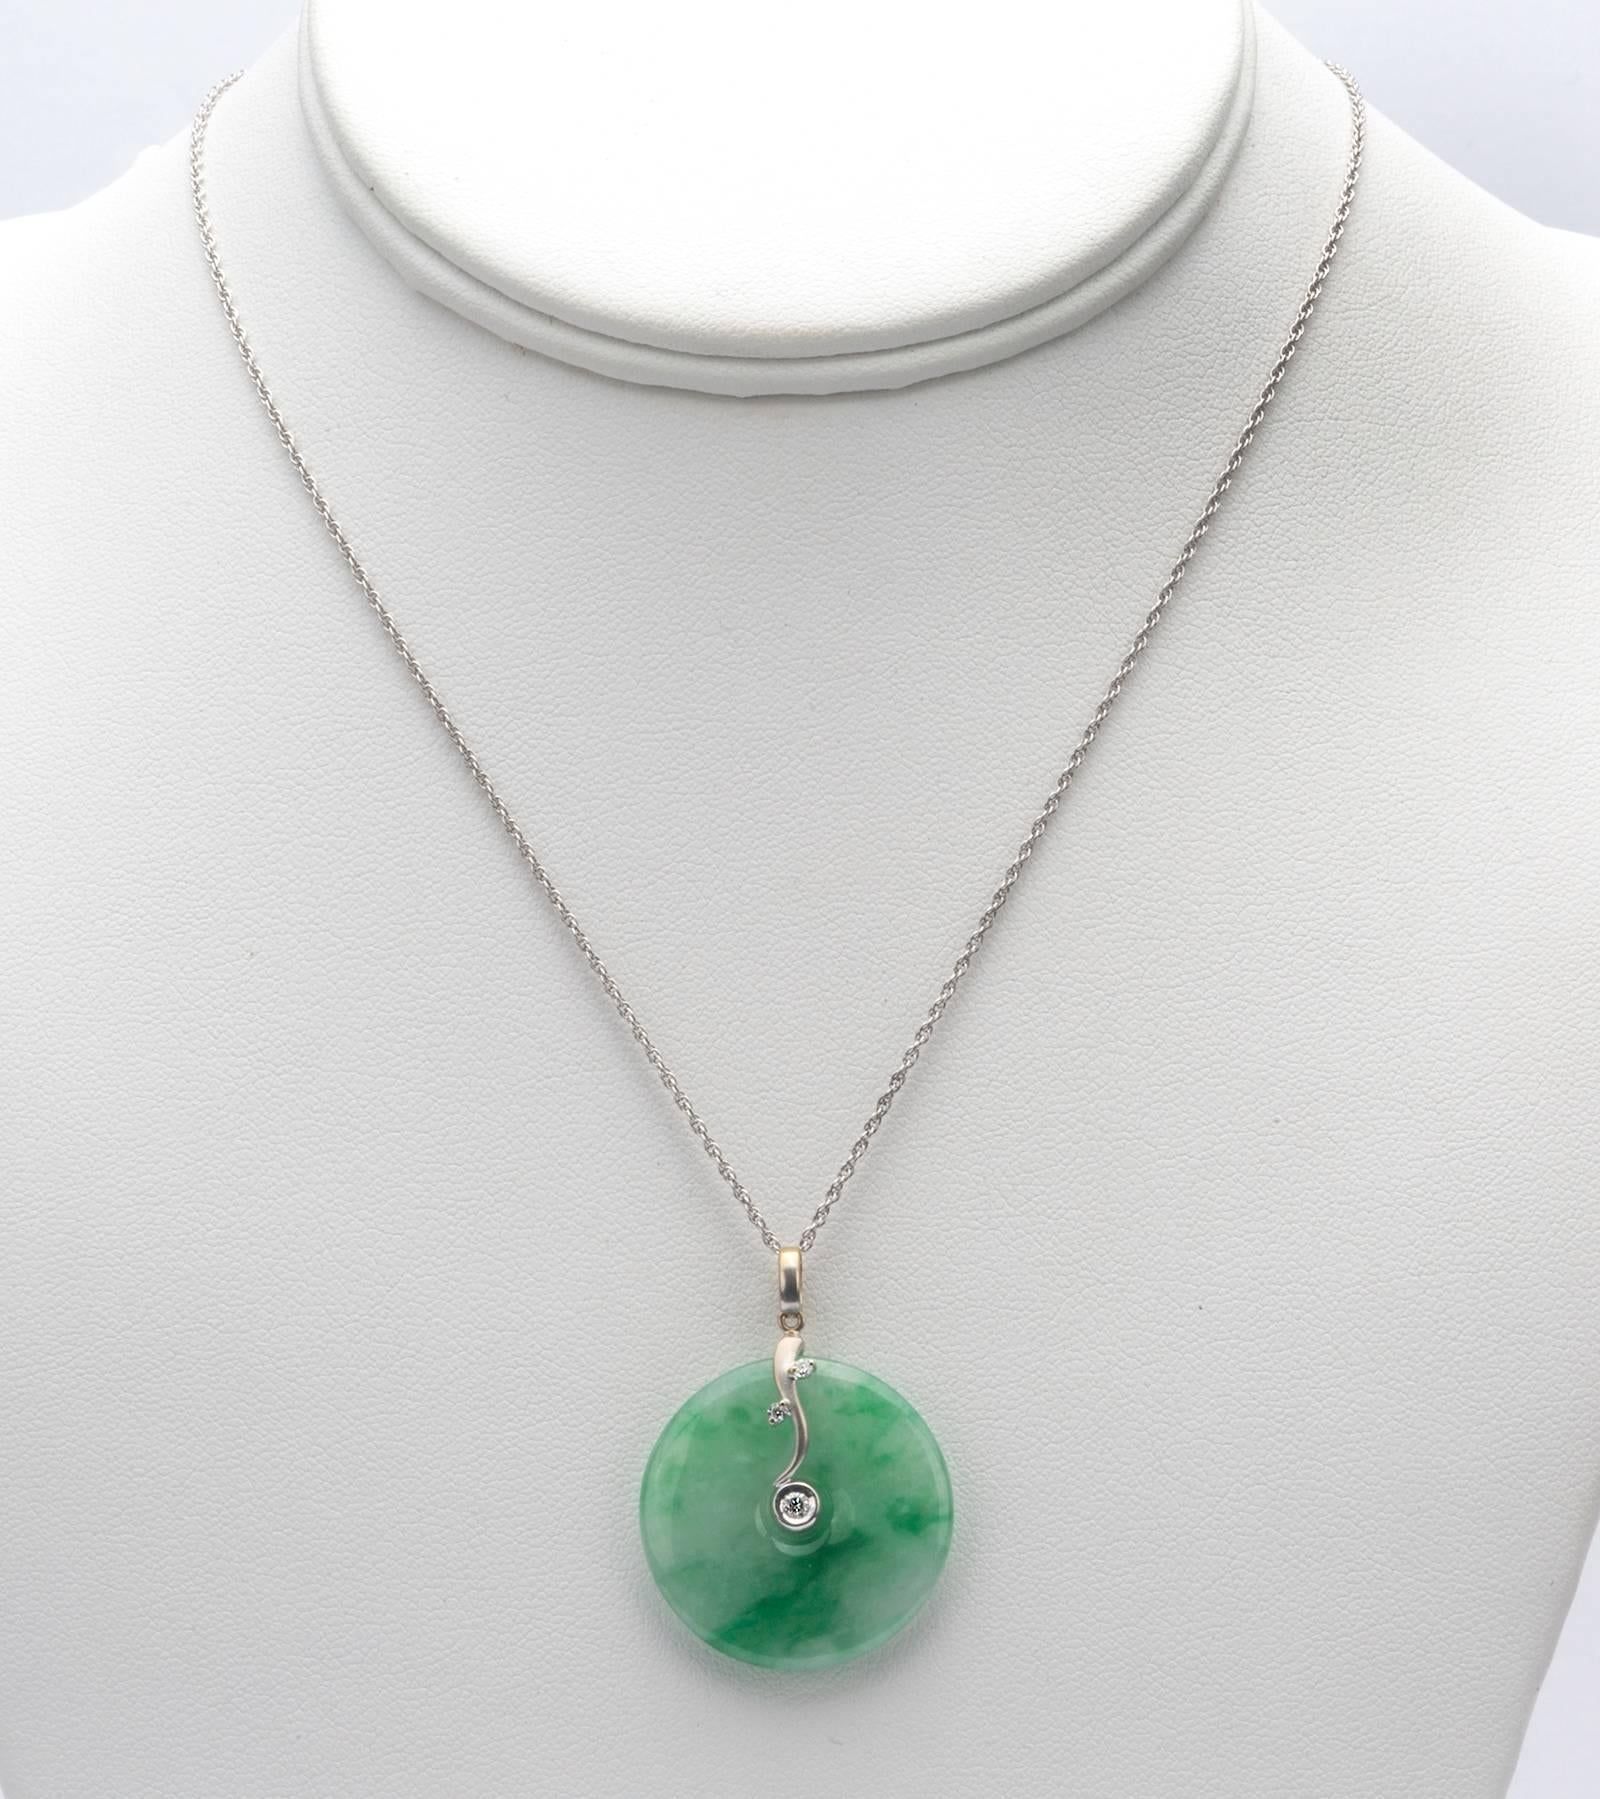 Clear green round Jade pendant with 18k white gold and three diamonds.  Hangs from a 14k yellow gold chain.  This item has been tested and verified by a GIA graduate gemologist.